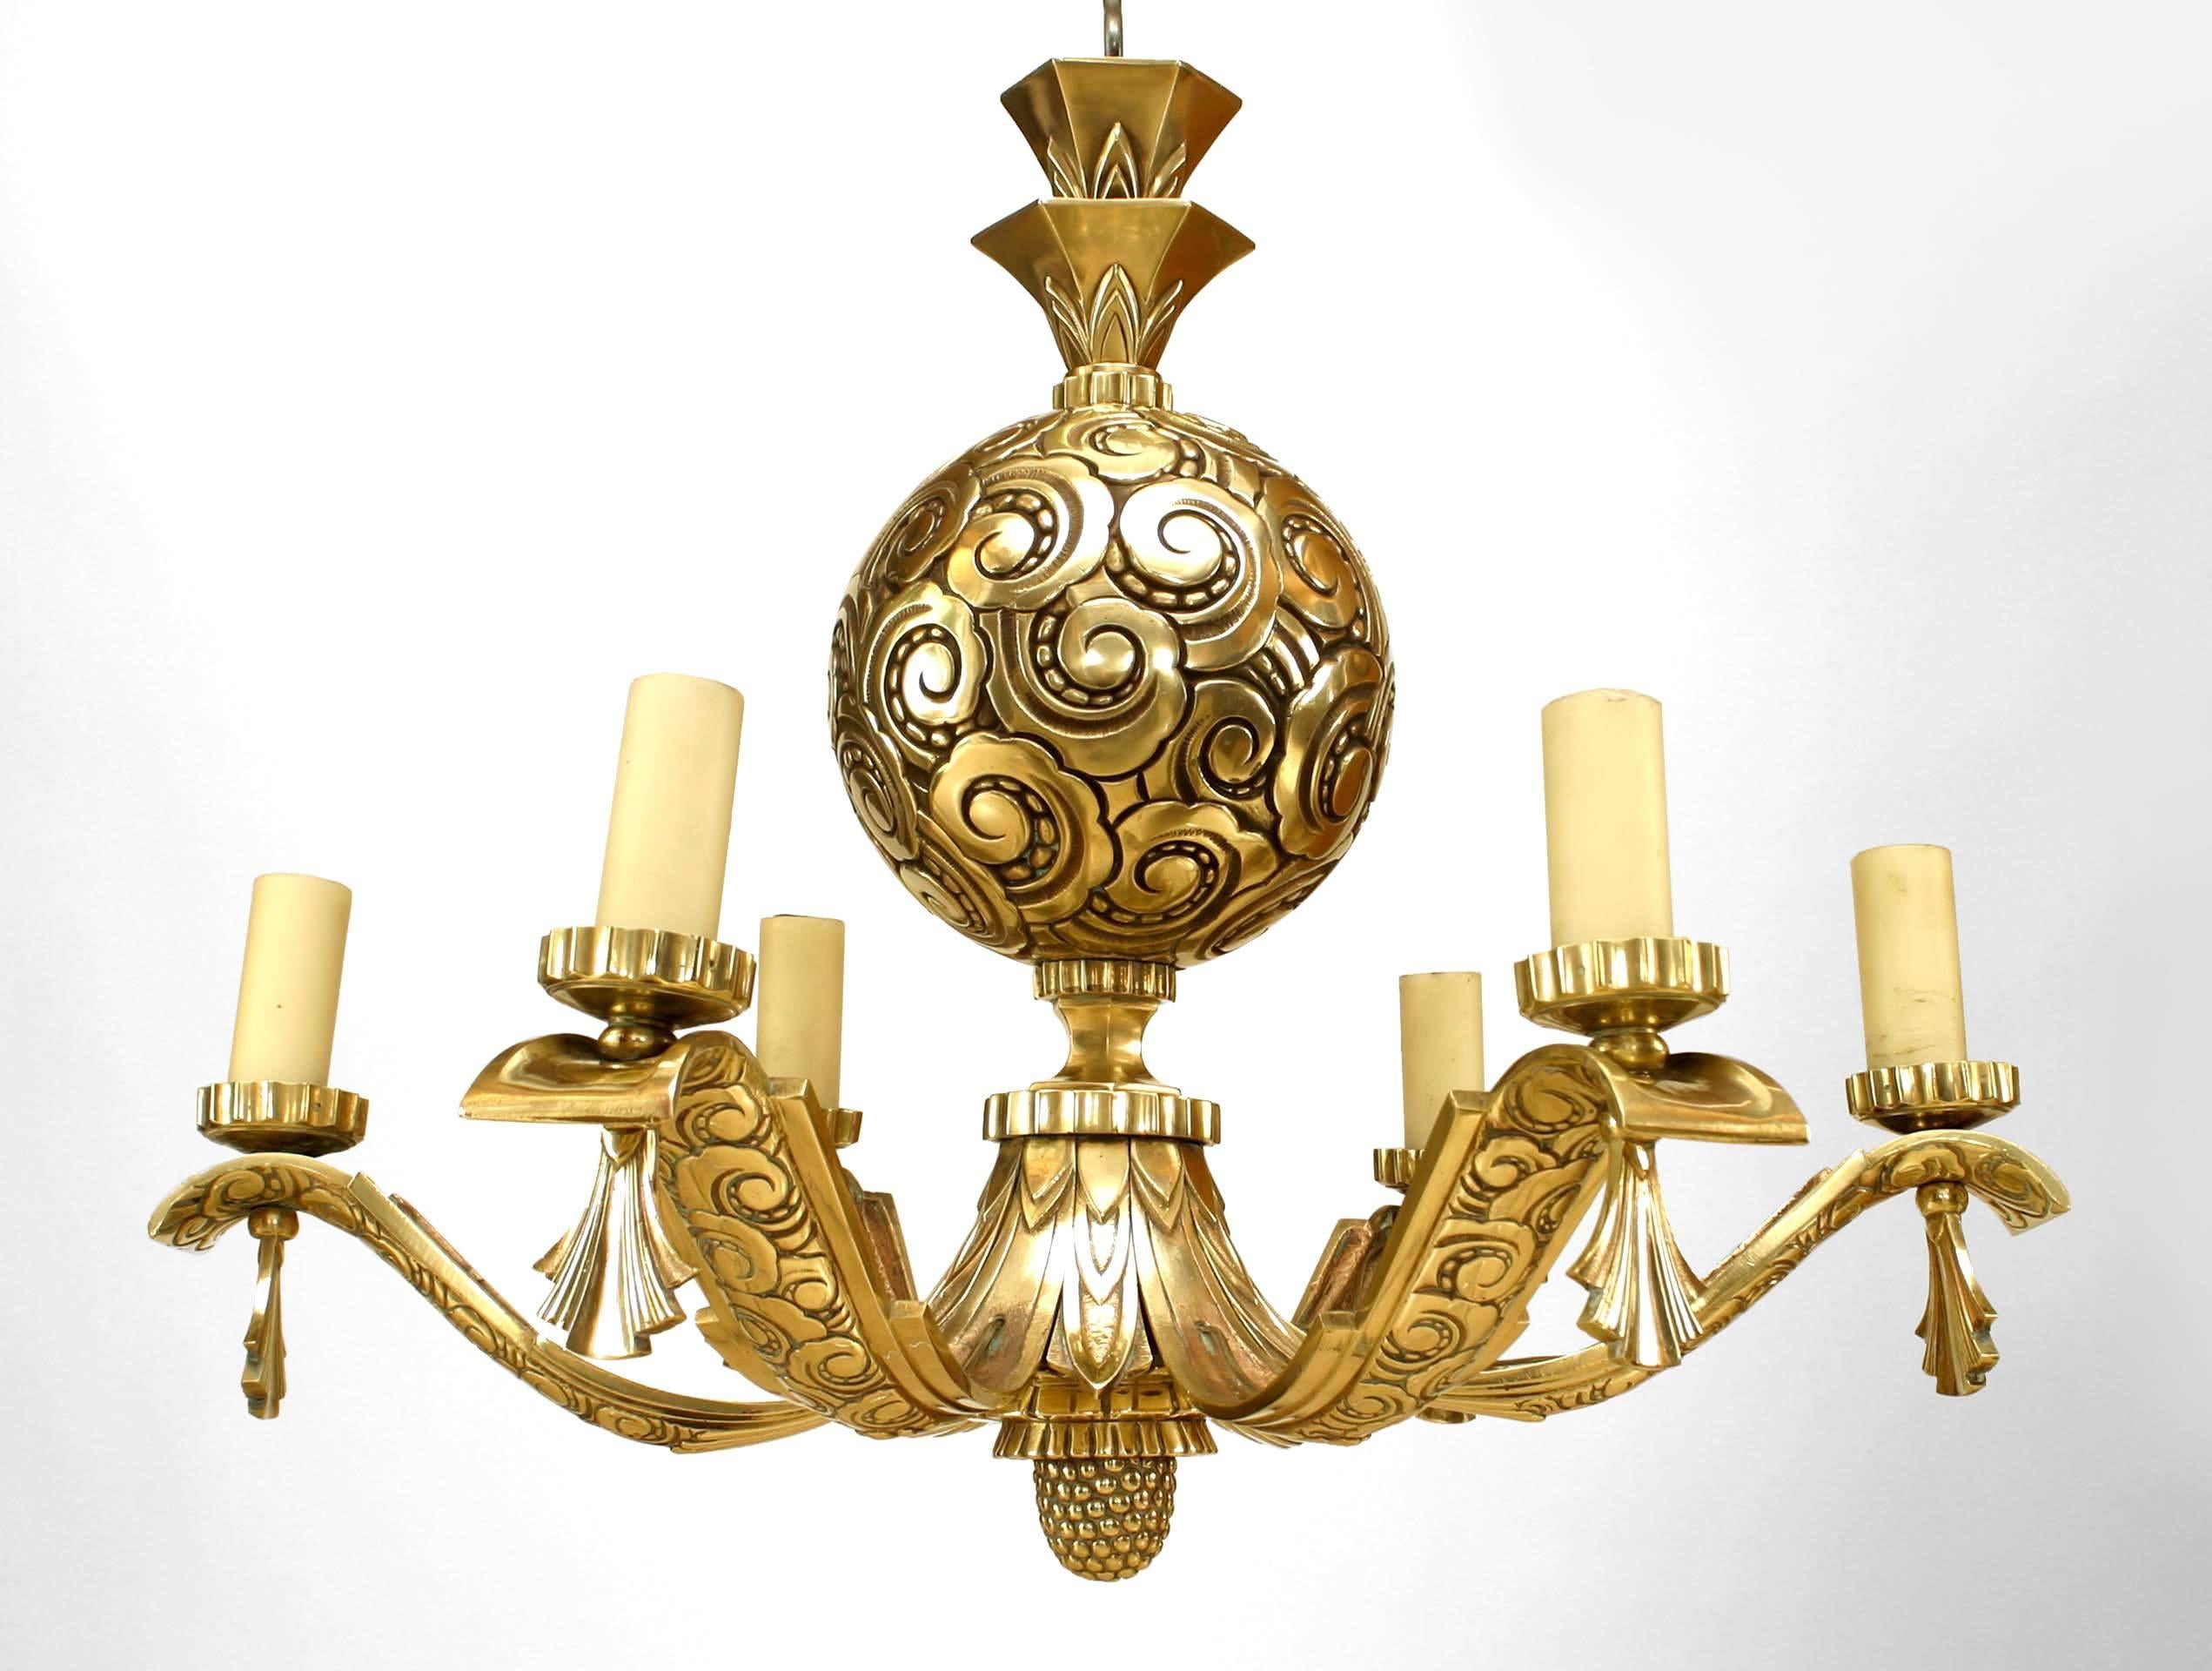 French Art Deco bronze chandelier featuring six scalloped, tassel-ended arms radiating out from a central, scroll-relief design sphere and acorn finial bottom.
